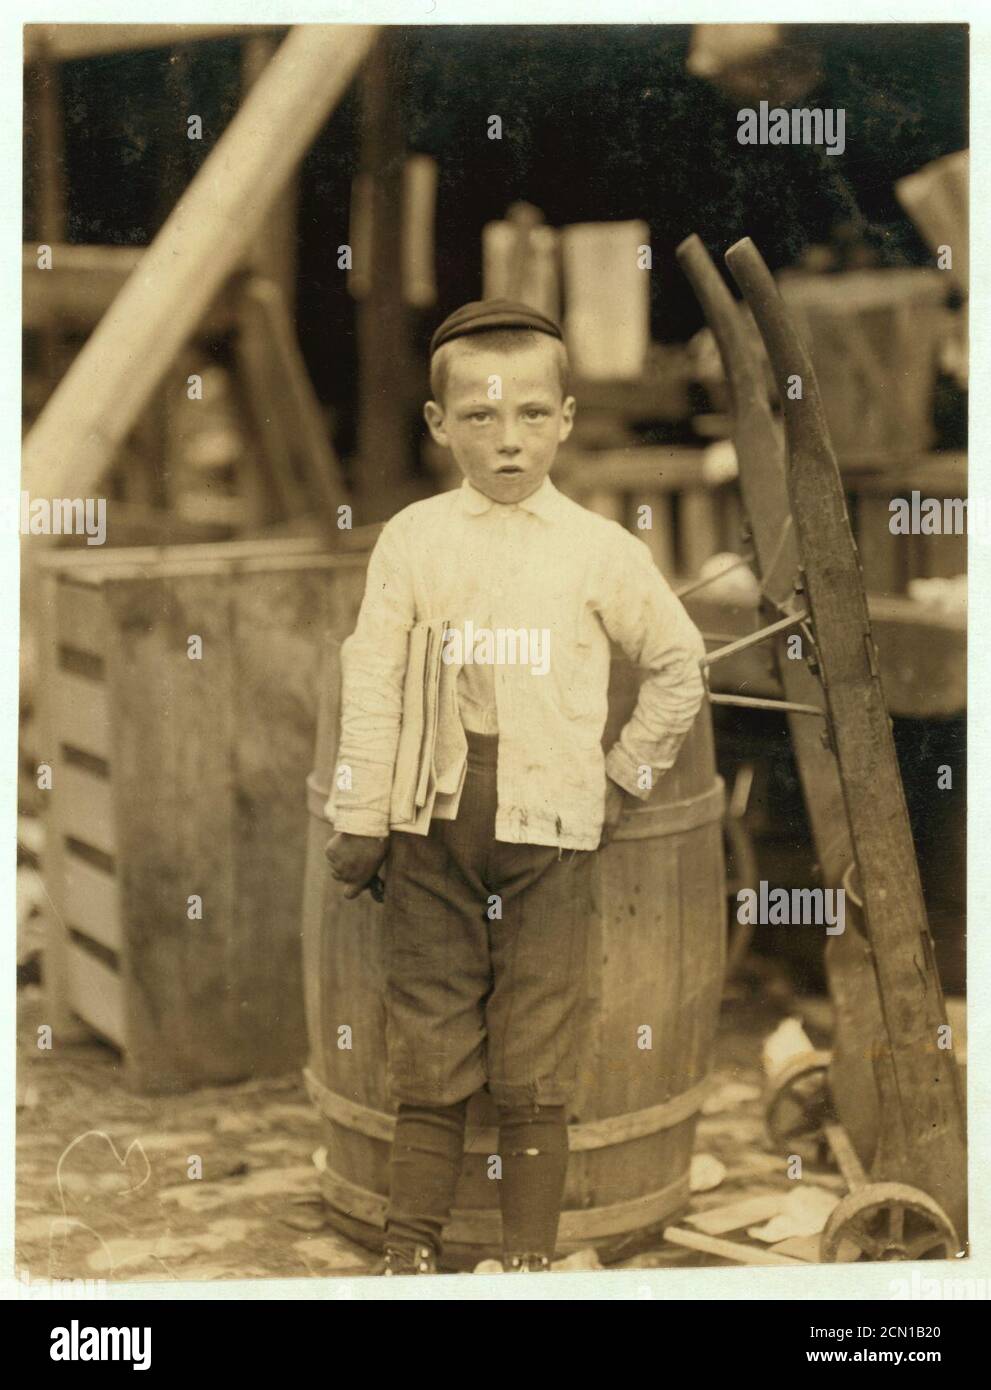 Joseph Wench, newsboy, 315 W. 2nd St. 7 years of age. Selling papers 2 years Average earnings 50 cents per week. Selling papers own choice. Earnings not needed at home. Visits saloons. Works Stock Photo